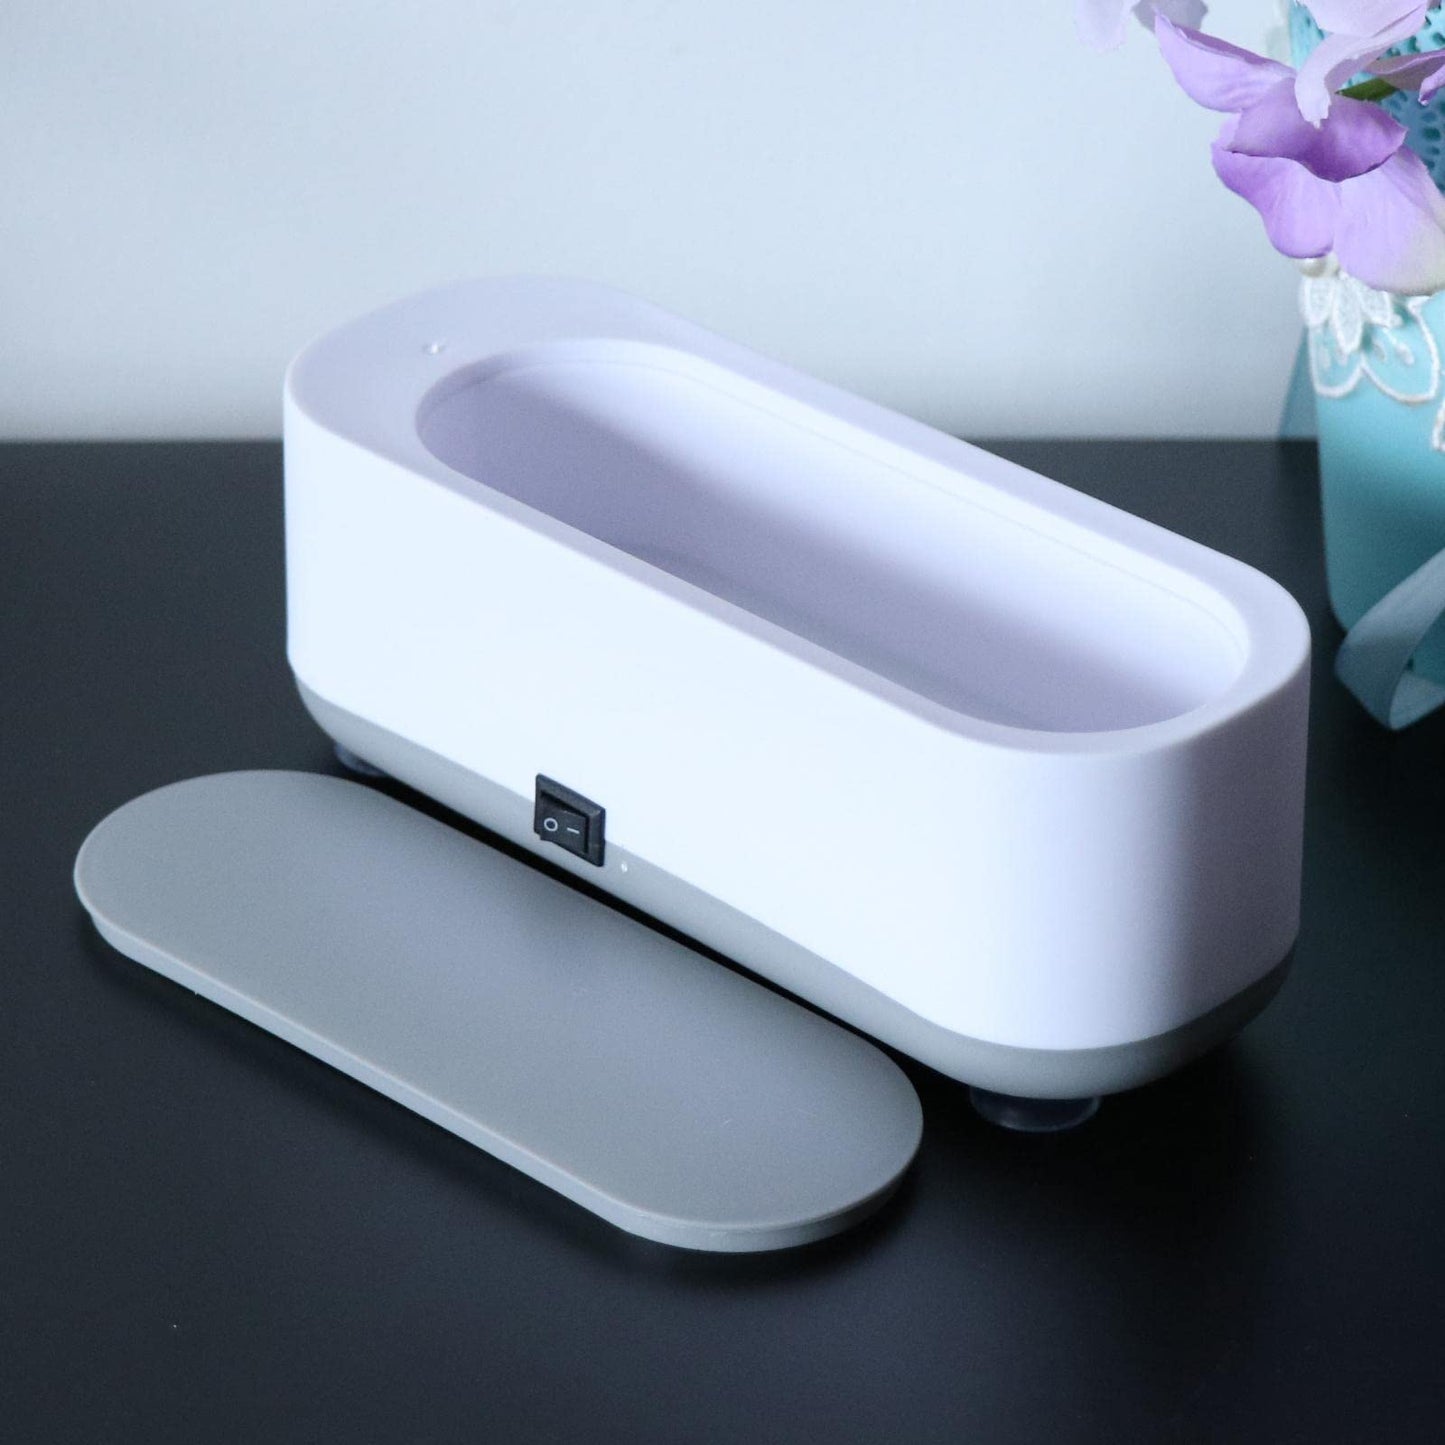 Portable Household Professional Ultrasonic Jewelry Cleaner Timer Vibration Wash Cleaner Washing Jewelry Watch Eye Glasses Ring Cleaning Machine Basket